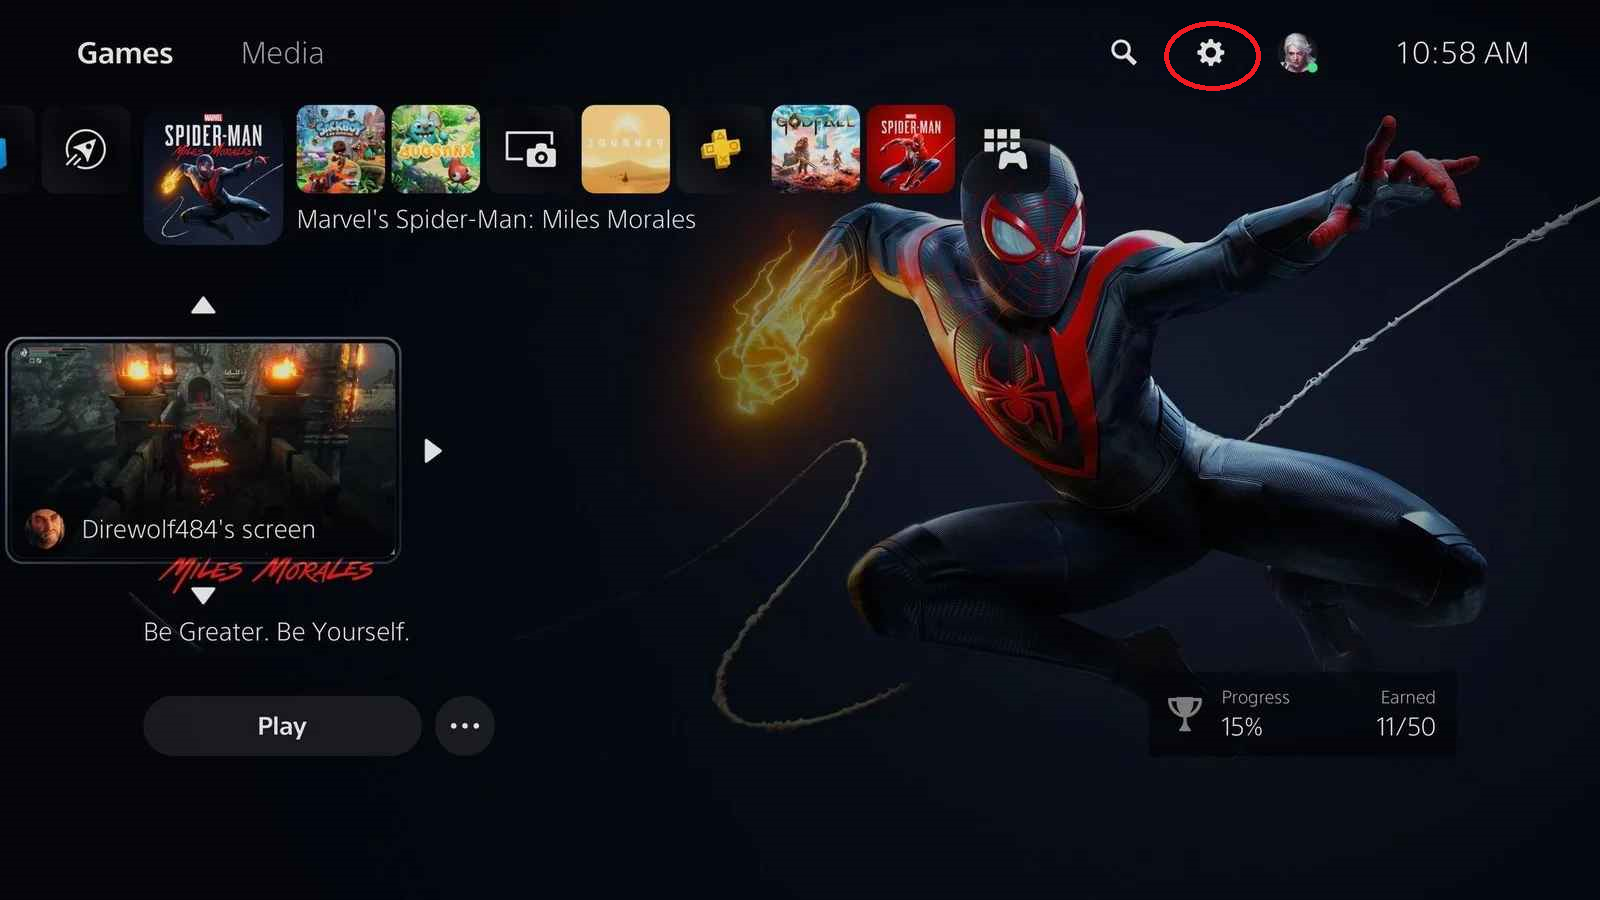 Home screen of PS5 to access Web Browser on PS5